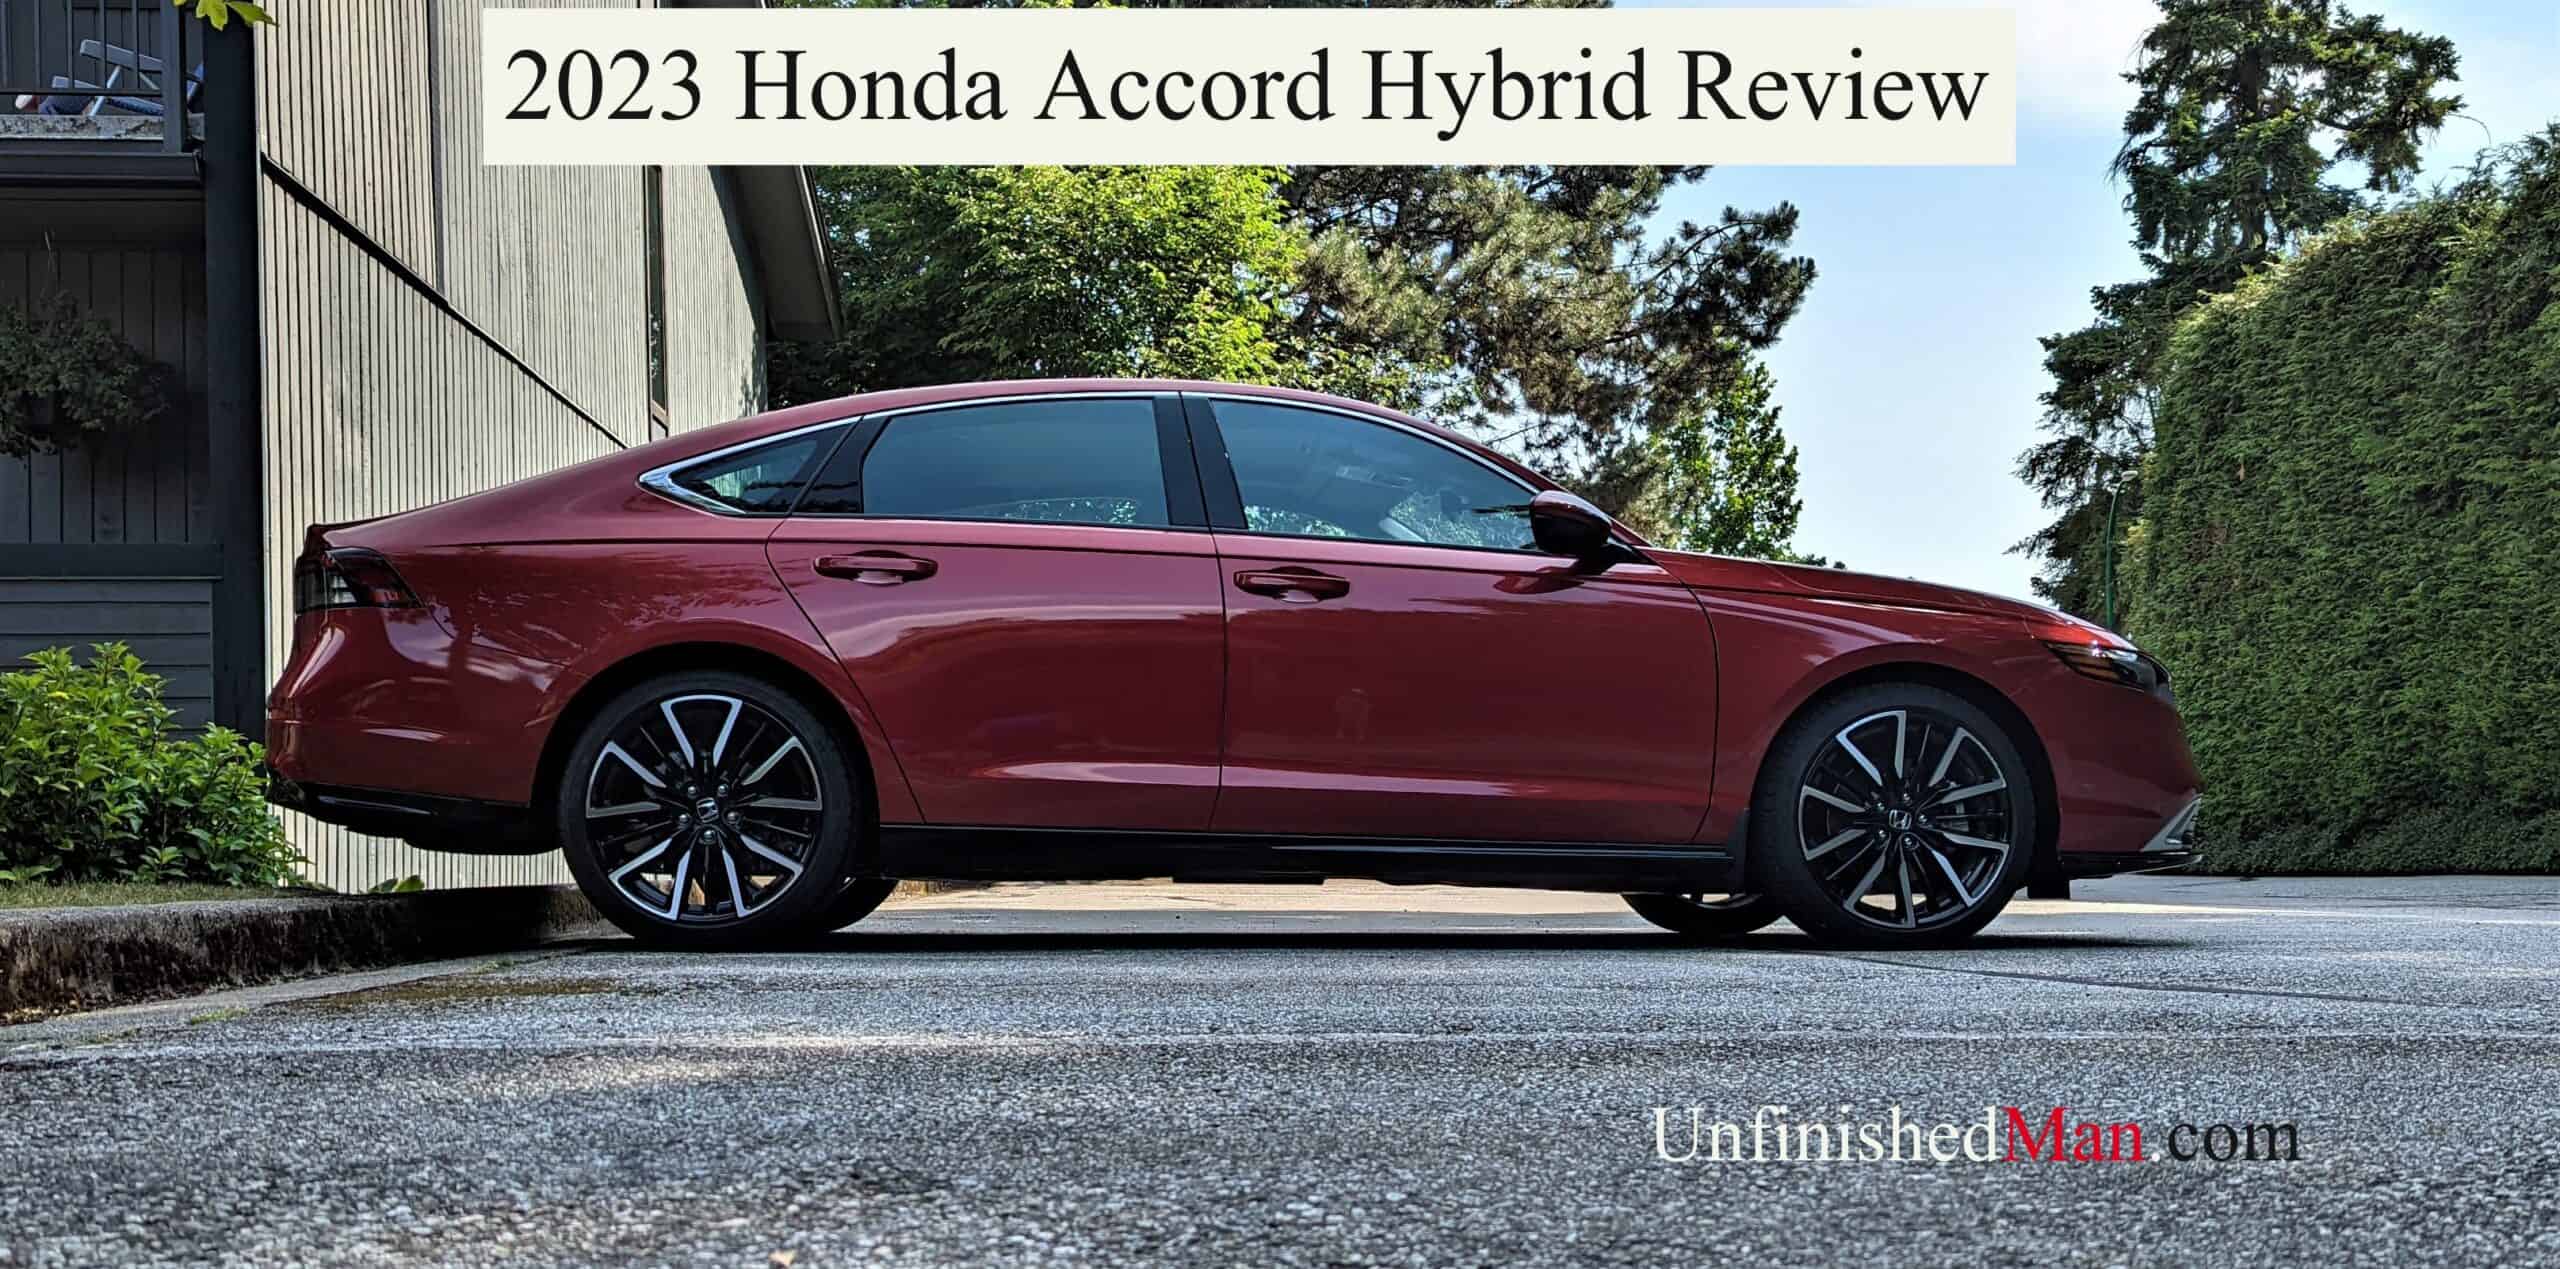 2023 Honda Accord Hybrid Touring Review scaled